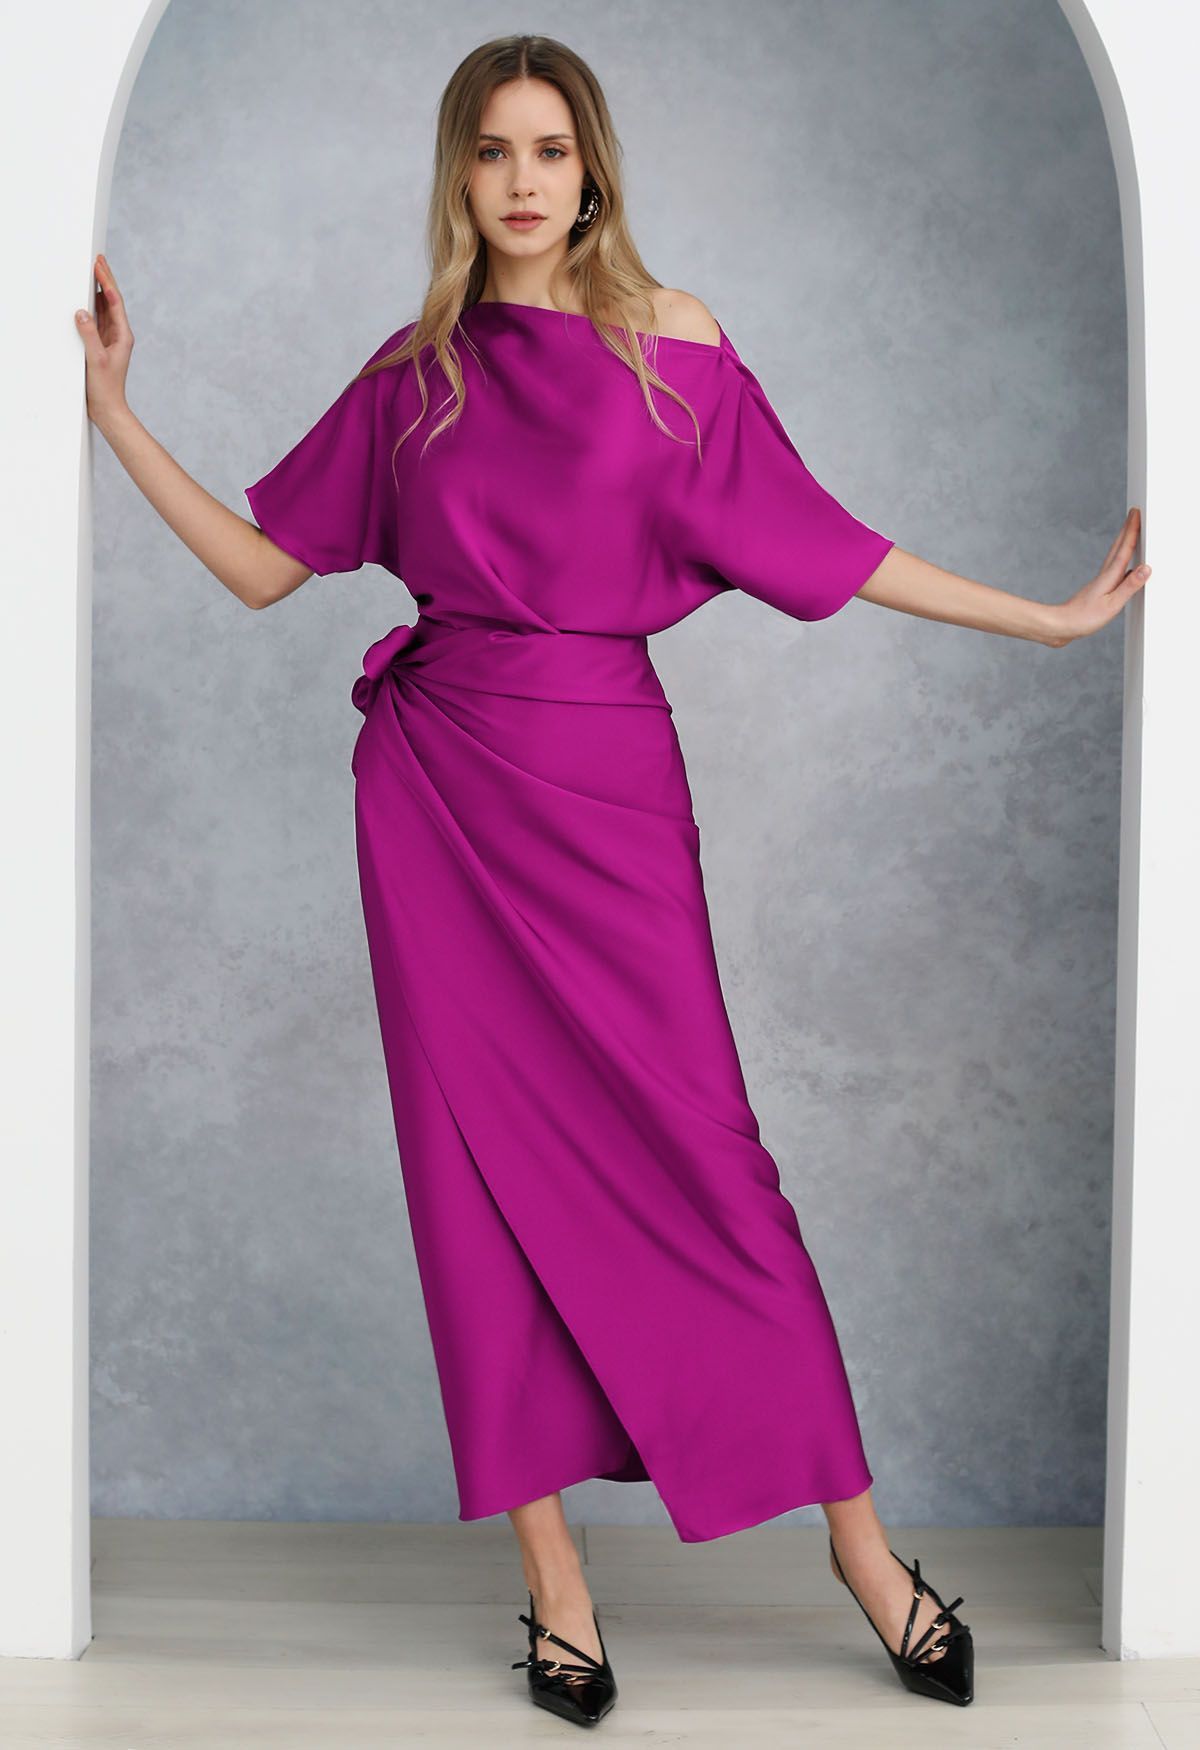 Satin Short-Sleeve Wrapped Waist Maxi Dress in Magenta | Chicwish